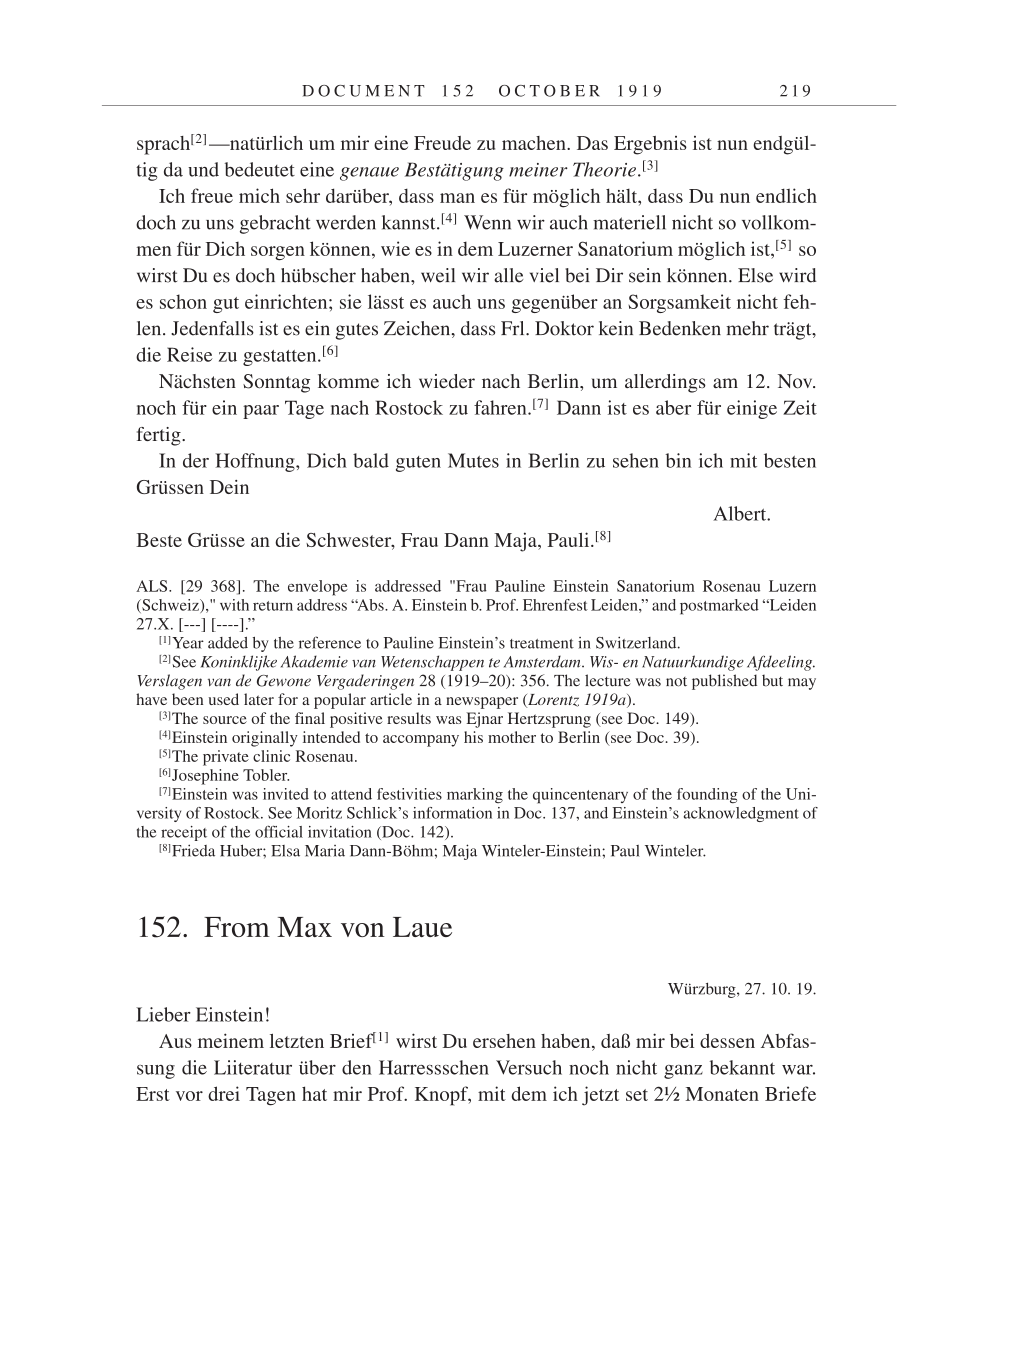 Volume 9: The Berlin Years: Correspondence January 1919-April 1920 page 219